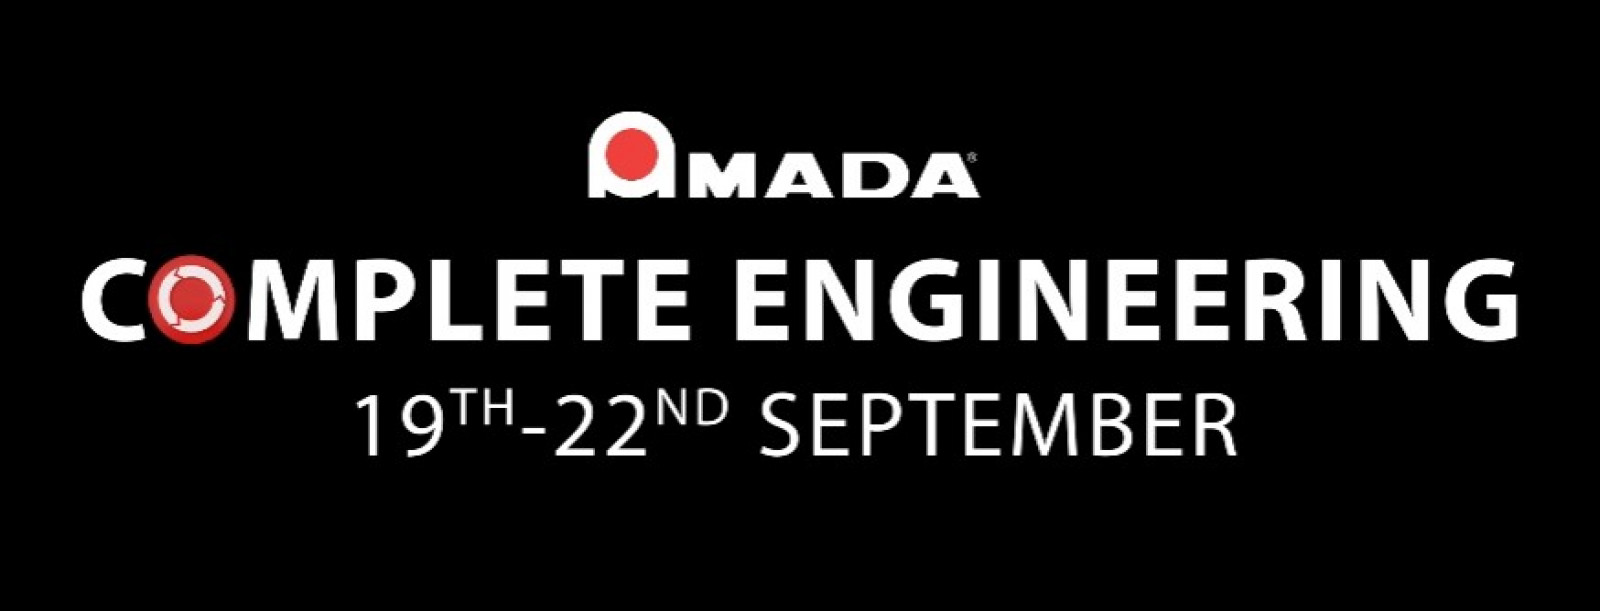 AMADA - THE COMPLETE ENGINEERING SOLUTION SHOW